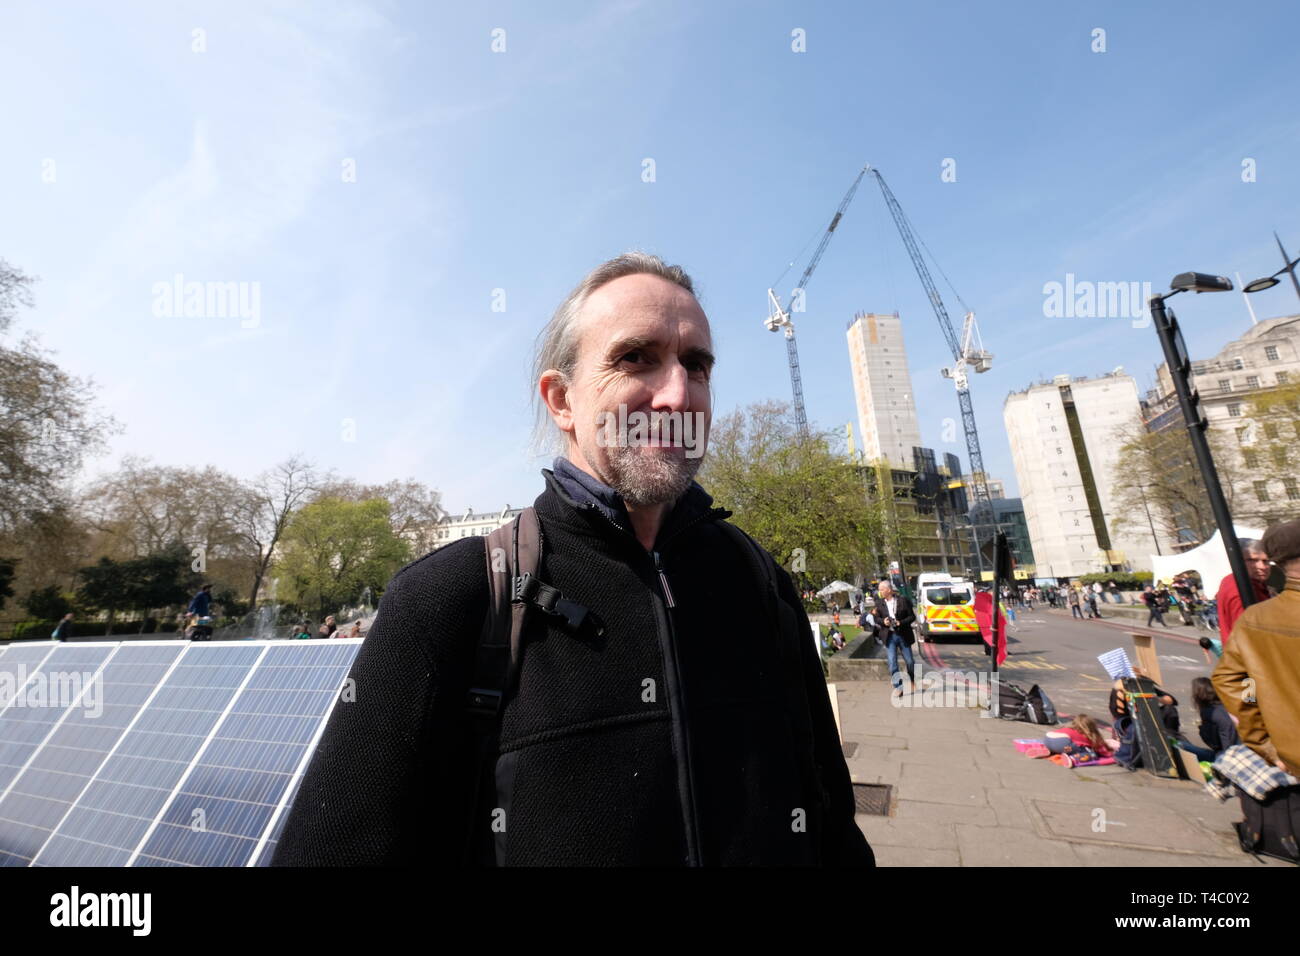 London, UK. 15th Apr, 2019. Climate protesters Extinction Rebellion on Day 1 of their shutdown London at Oxford circus and Marble arch Roger Hallam Credit: Rachel Megawhat/Alamy Live News Stock Photo